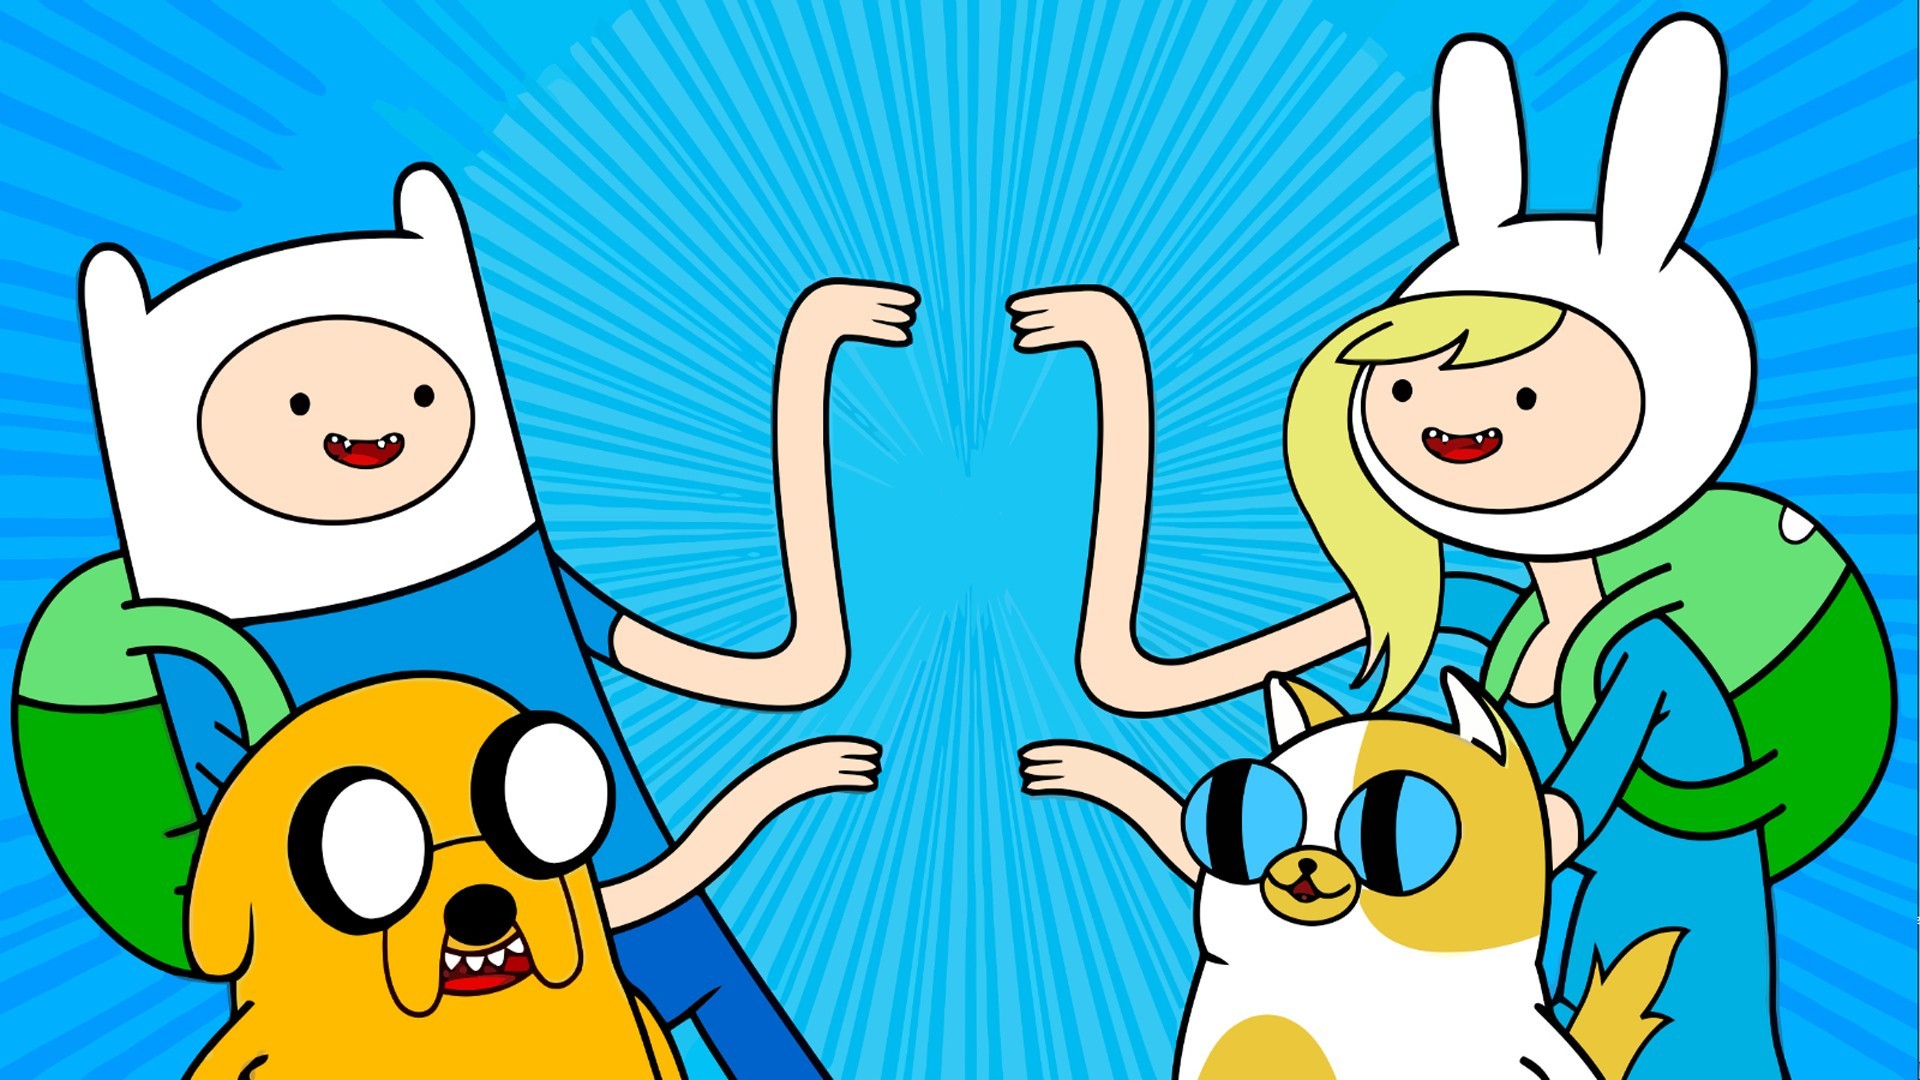 Hd Wallpapers Adventure Time